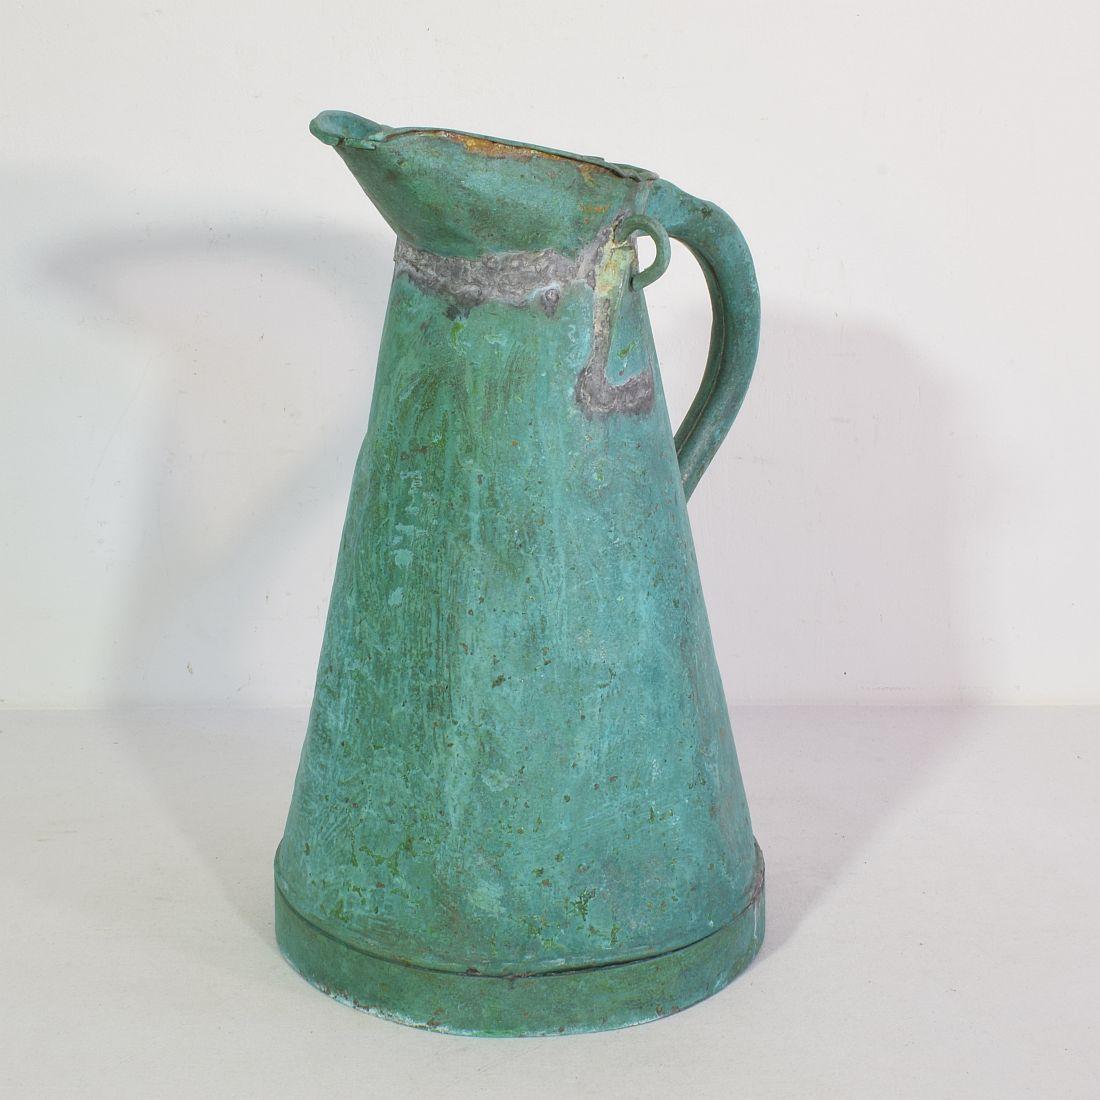 Stunning copper watering can with great green patina, France, circa 1850-1900. Weathered, small losses and old repairs.
Great to use as a decorative object in or outside. Might have leaks.